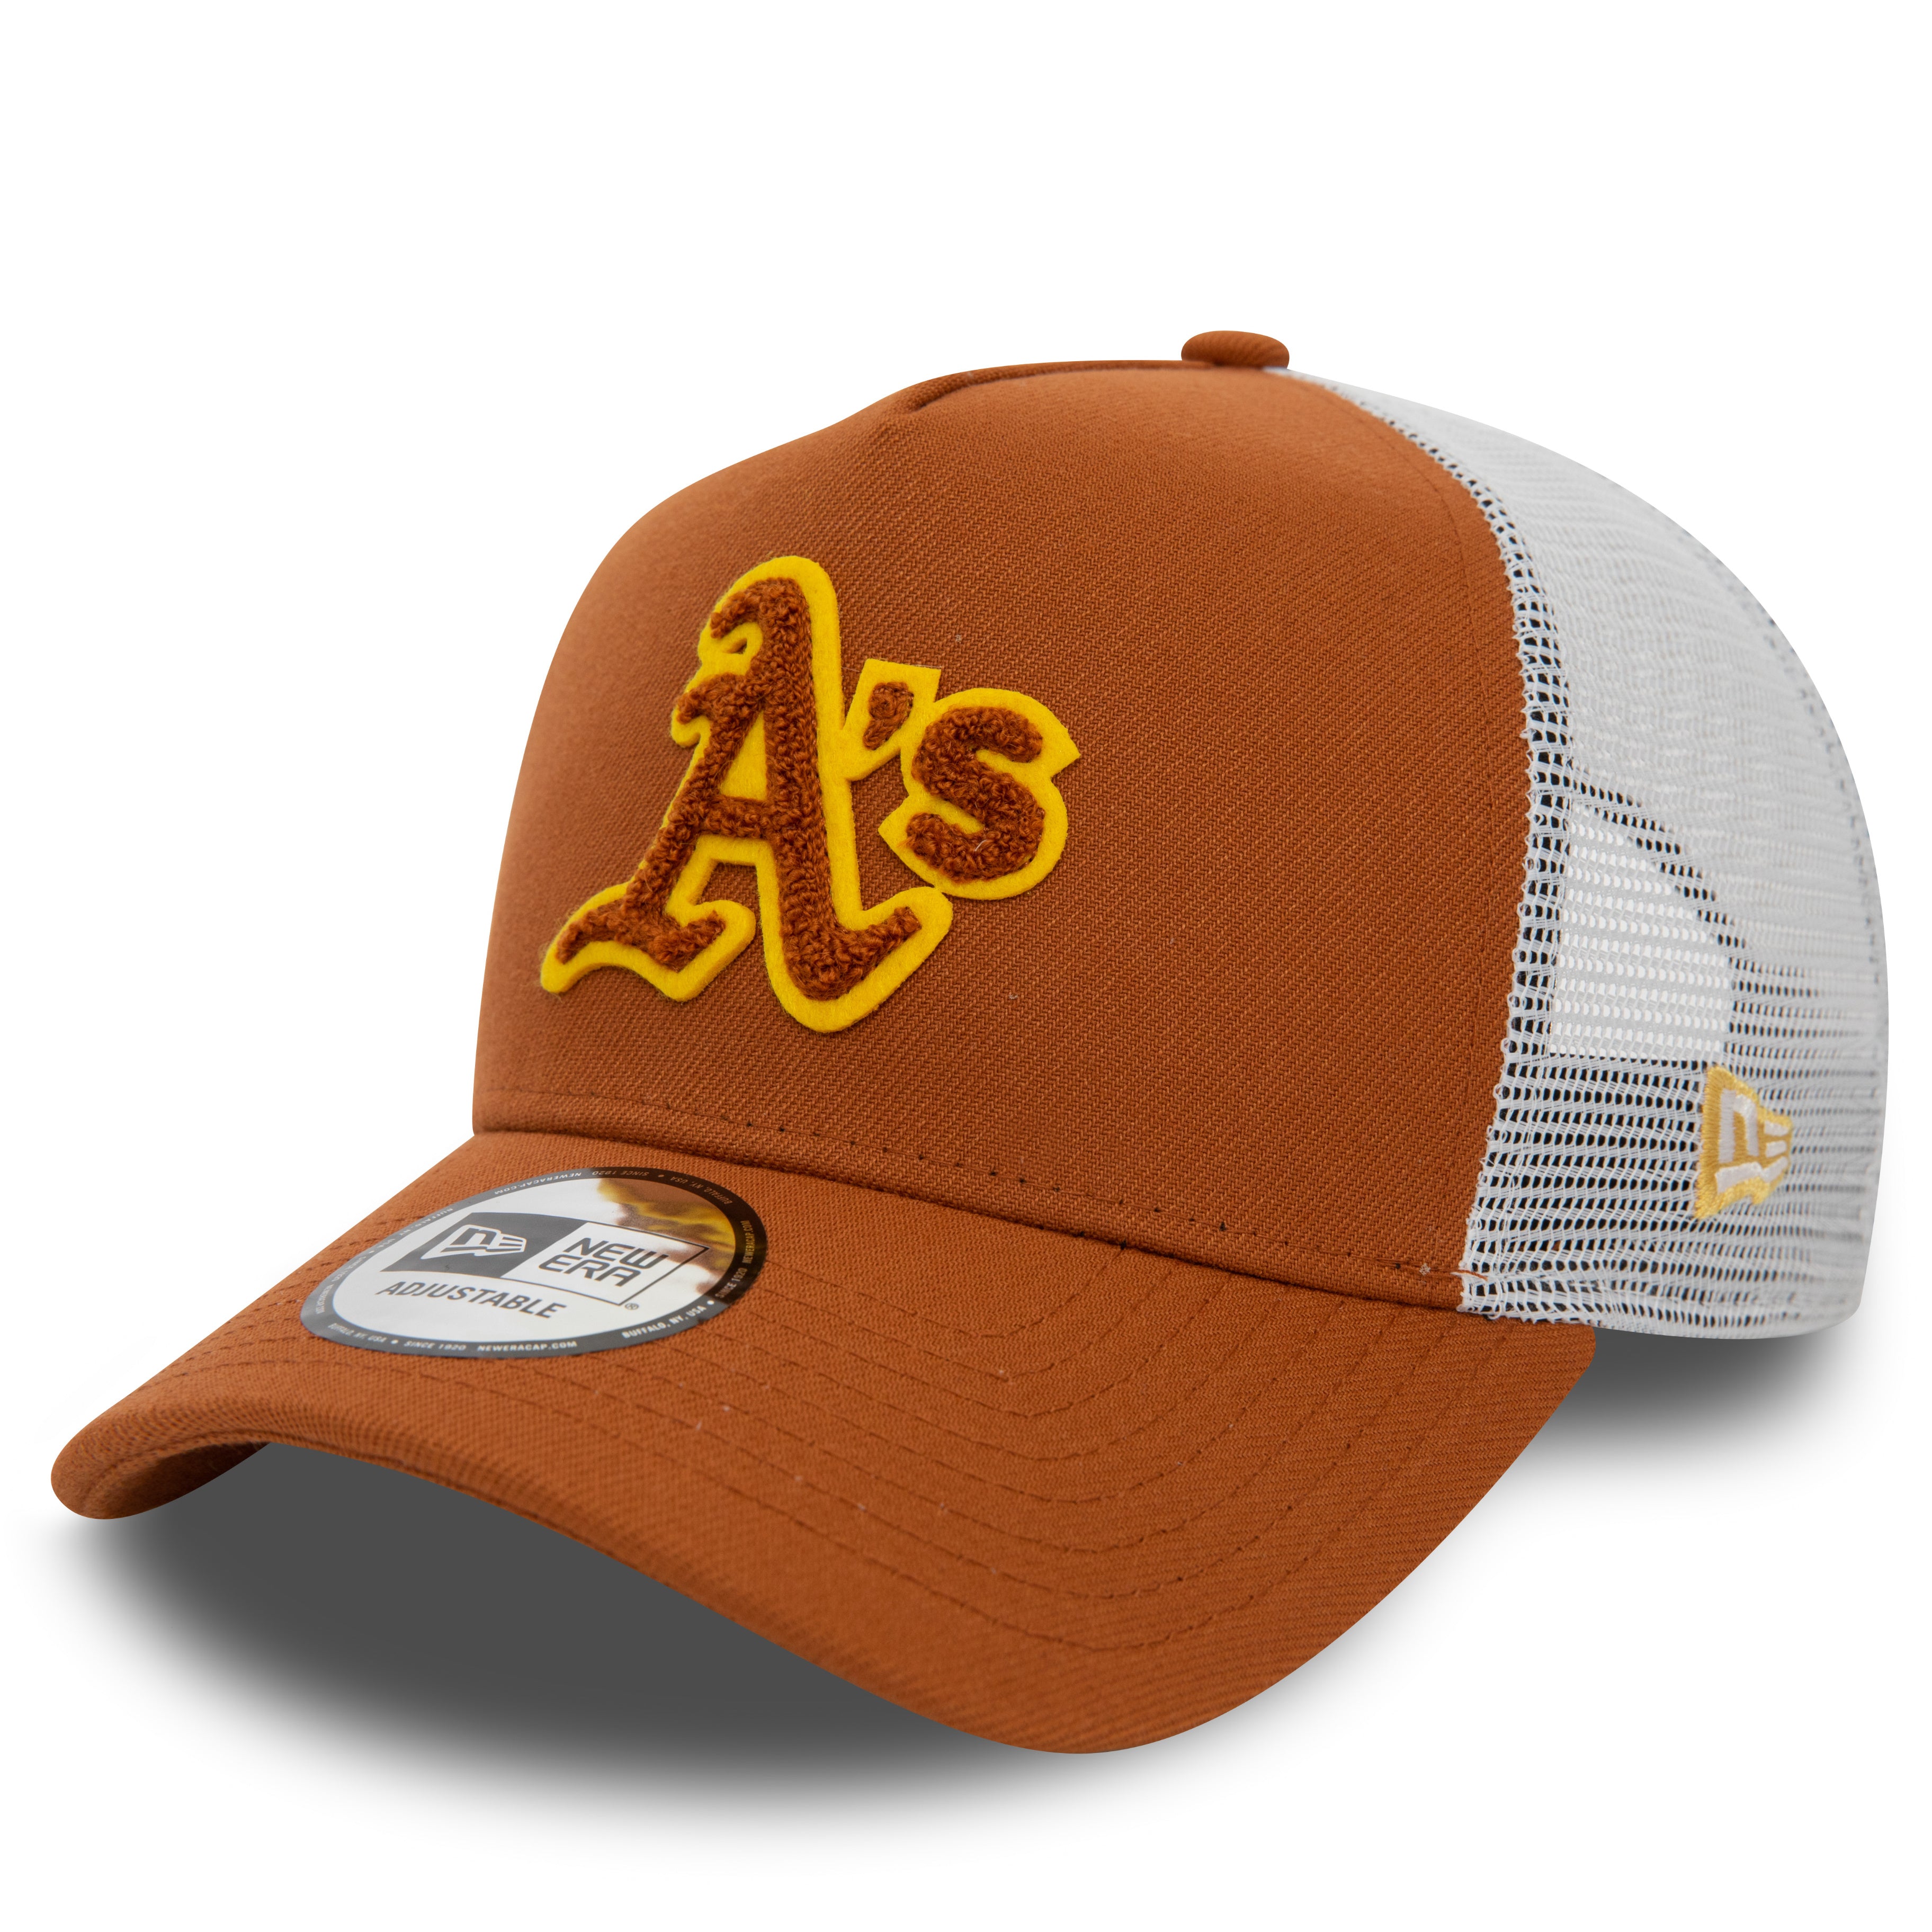 NEW ERA 9FORTY MLB BOUCLE OAKLAND ATHLETICS A-FRAME MED BROWN TRUCKER